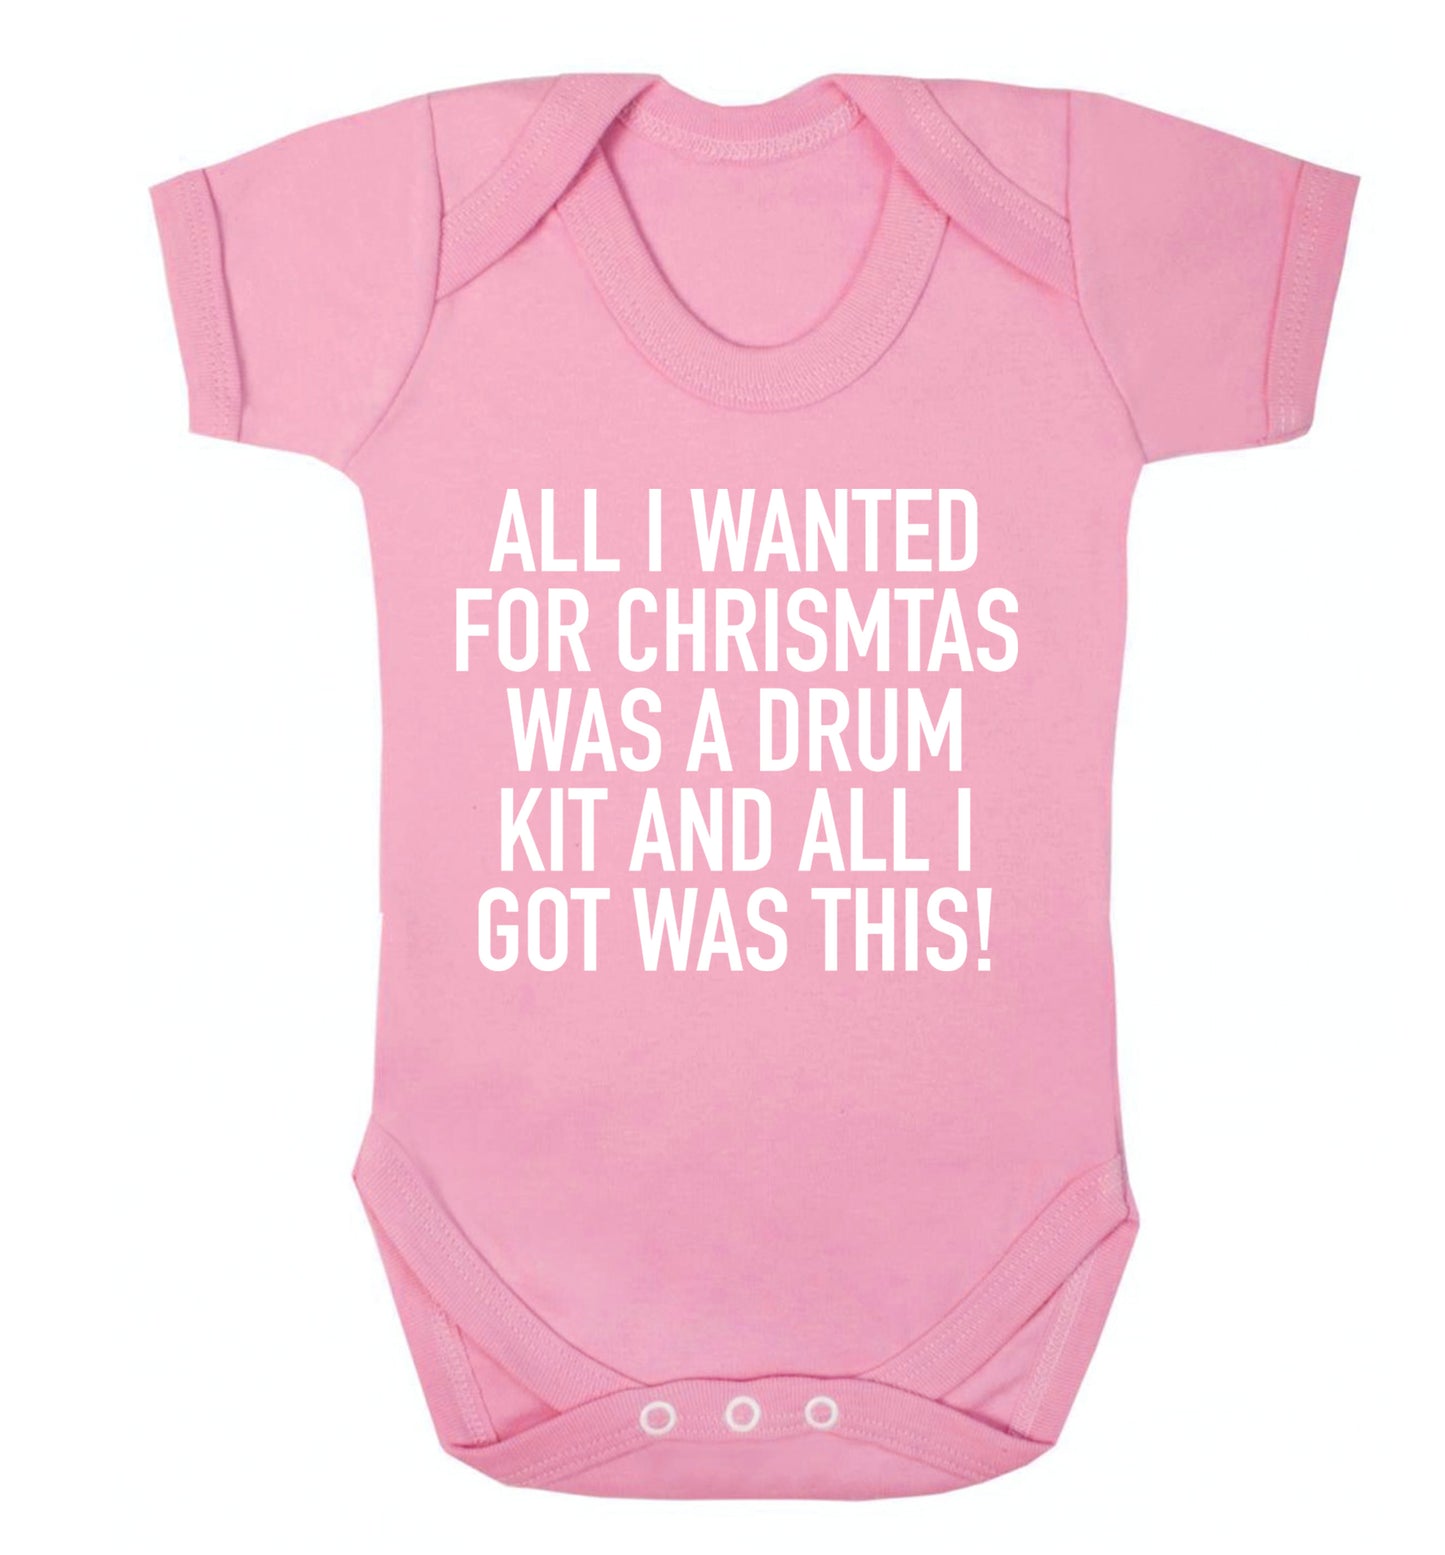 All I wanted for Christmas was a drum kit and all I got was this! Baby Vest pale pink 18-24 months